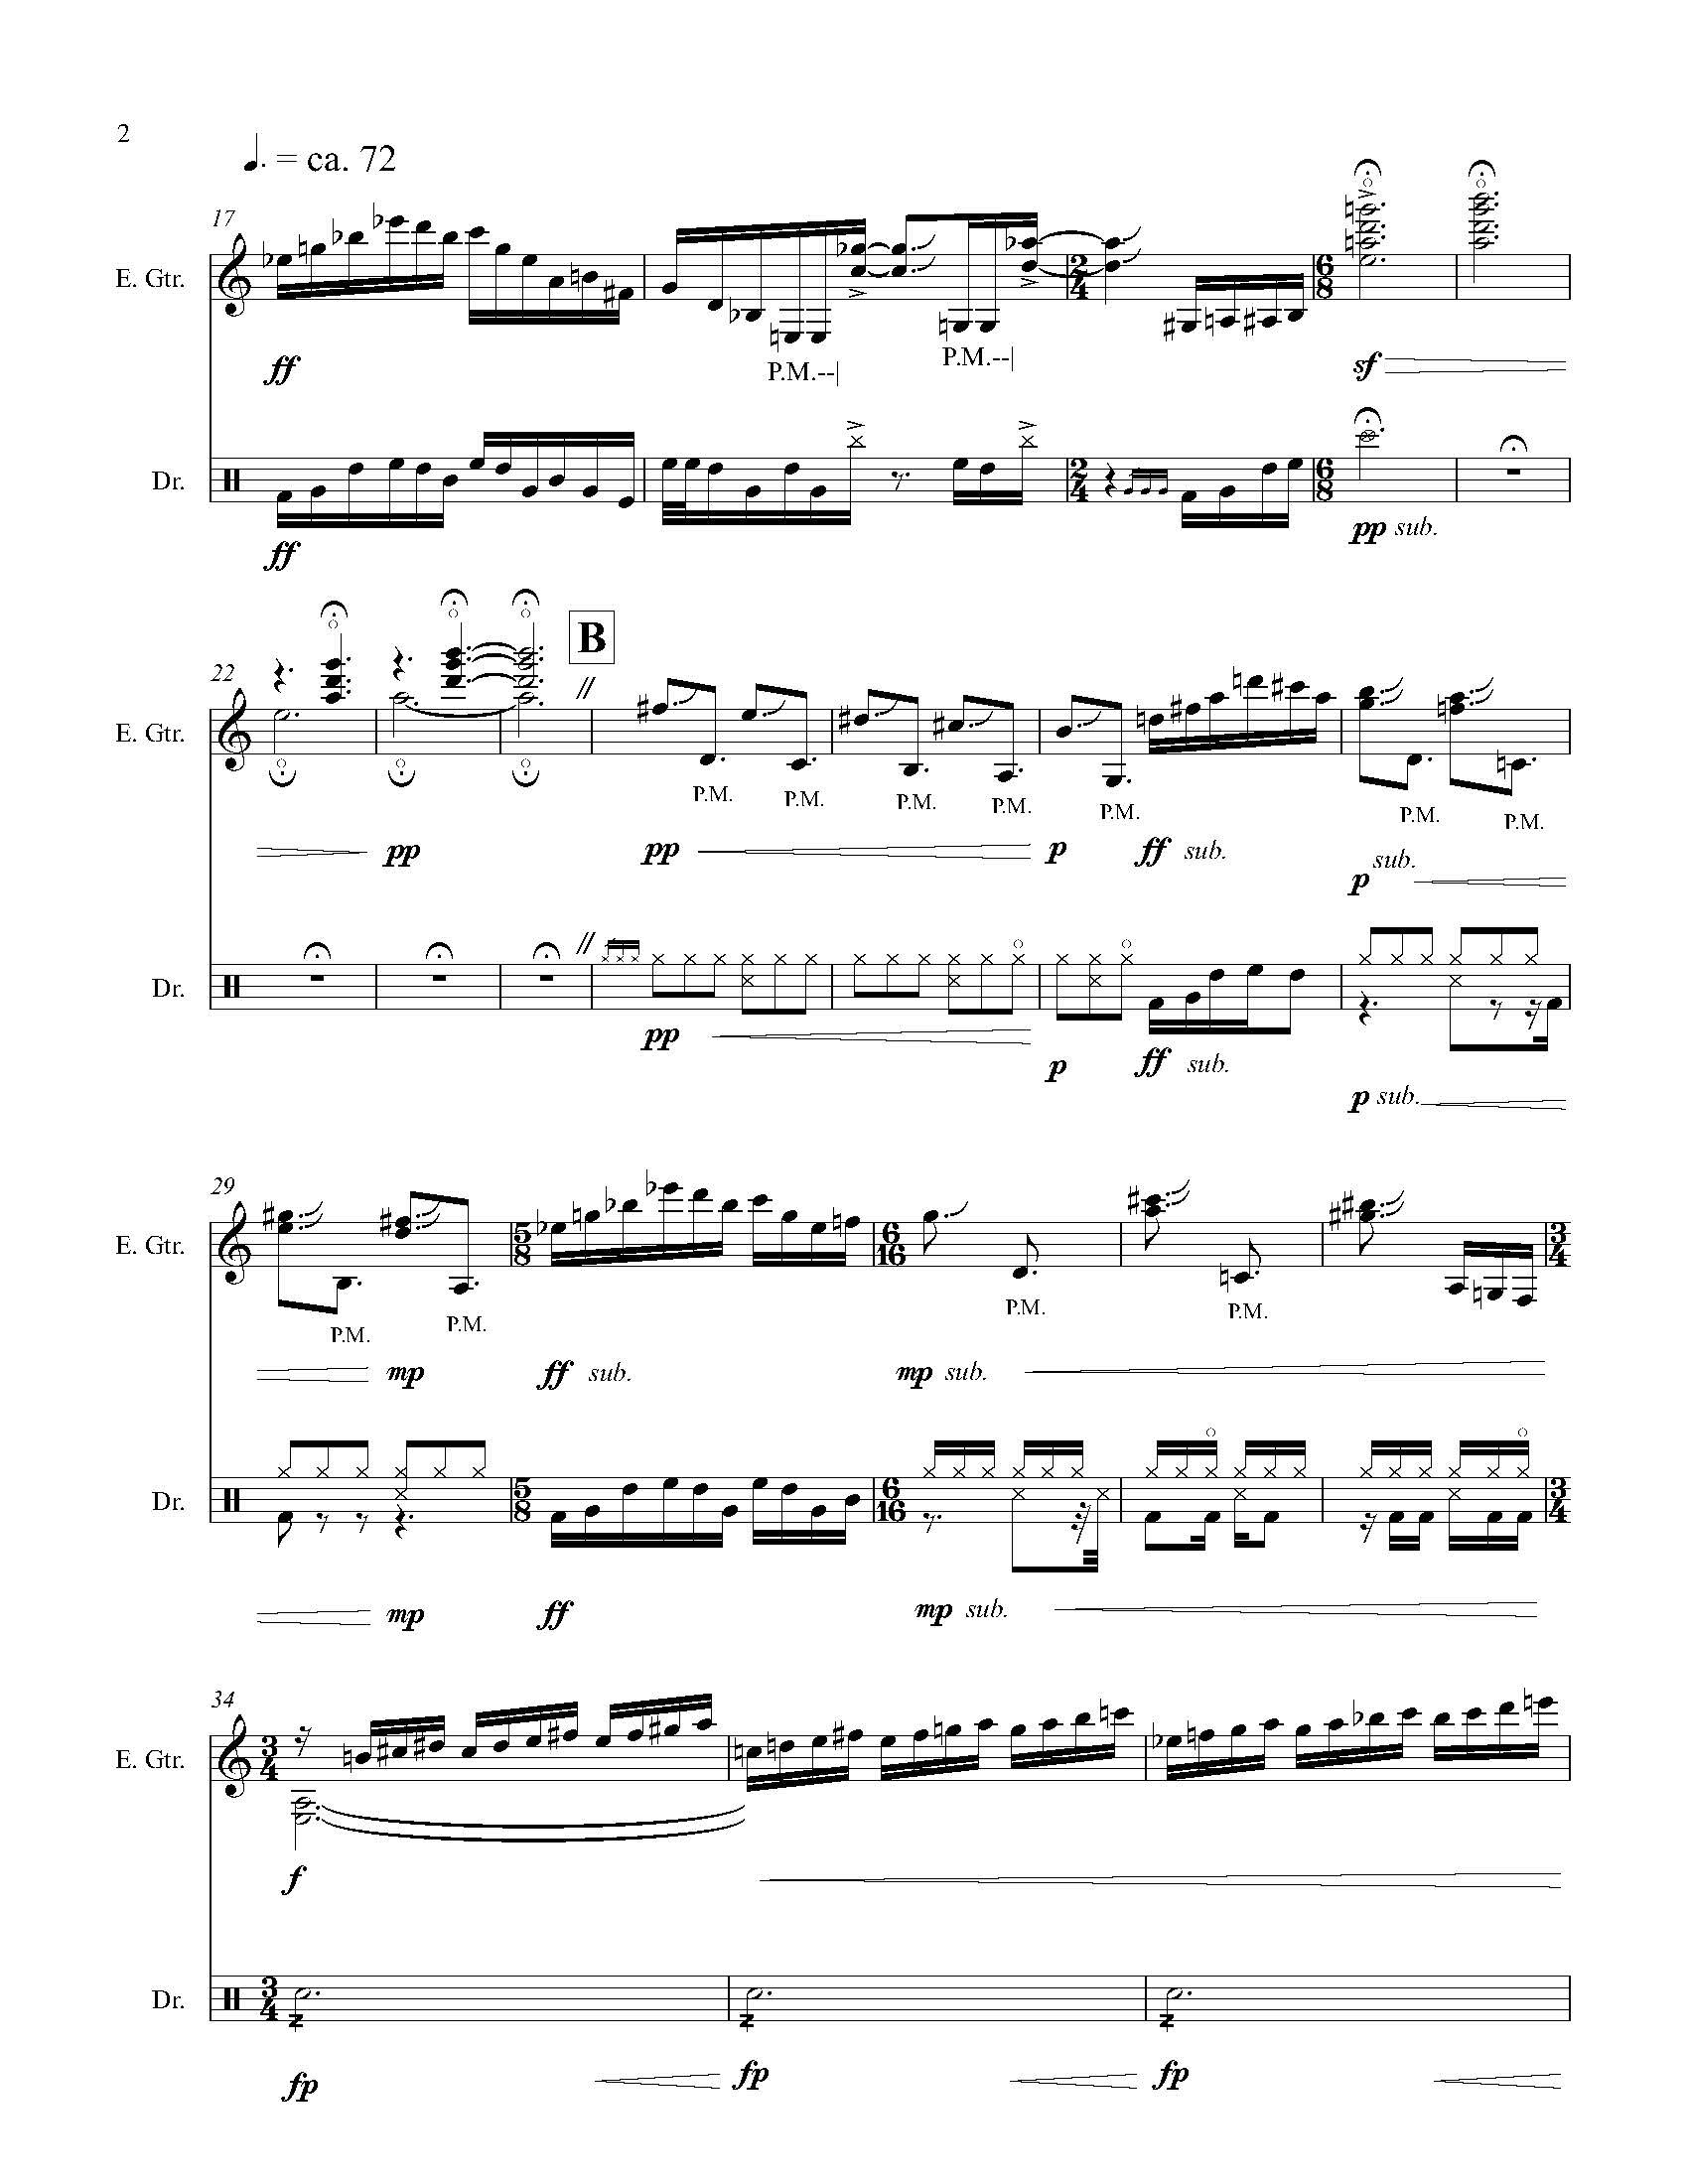 Atoms - Complete Score_Page_08.jpg